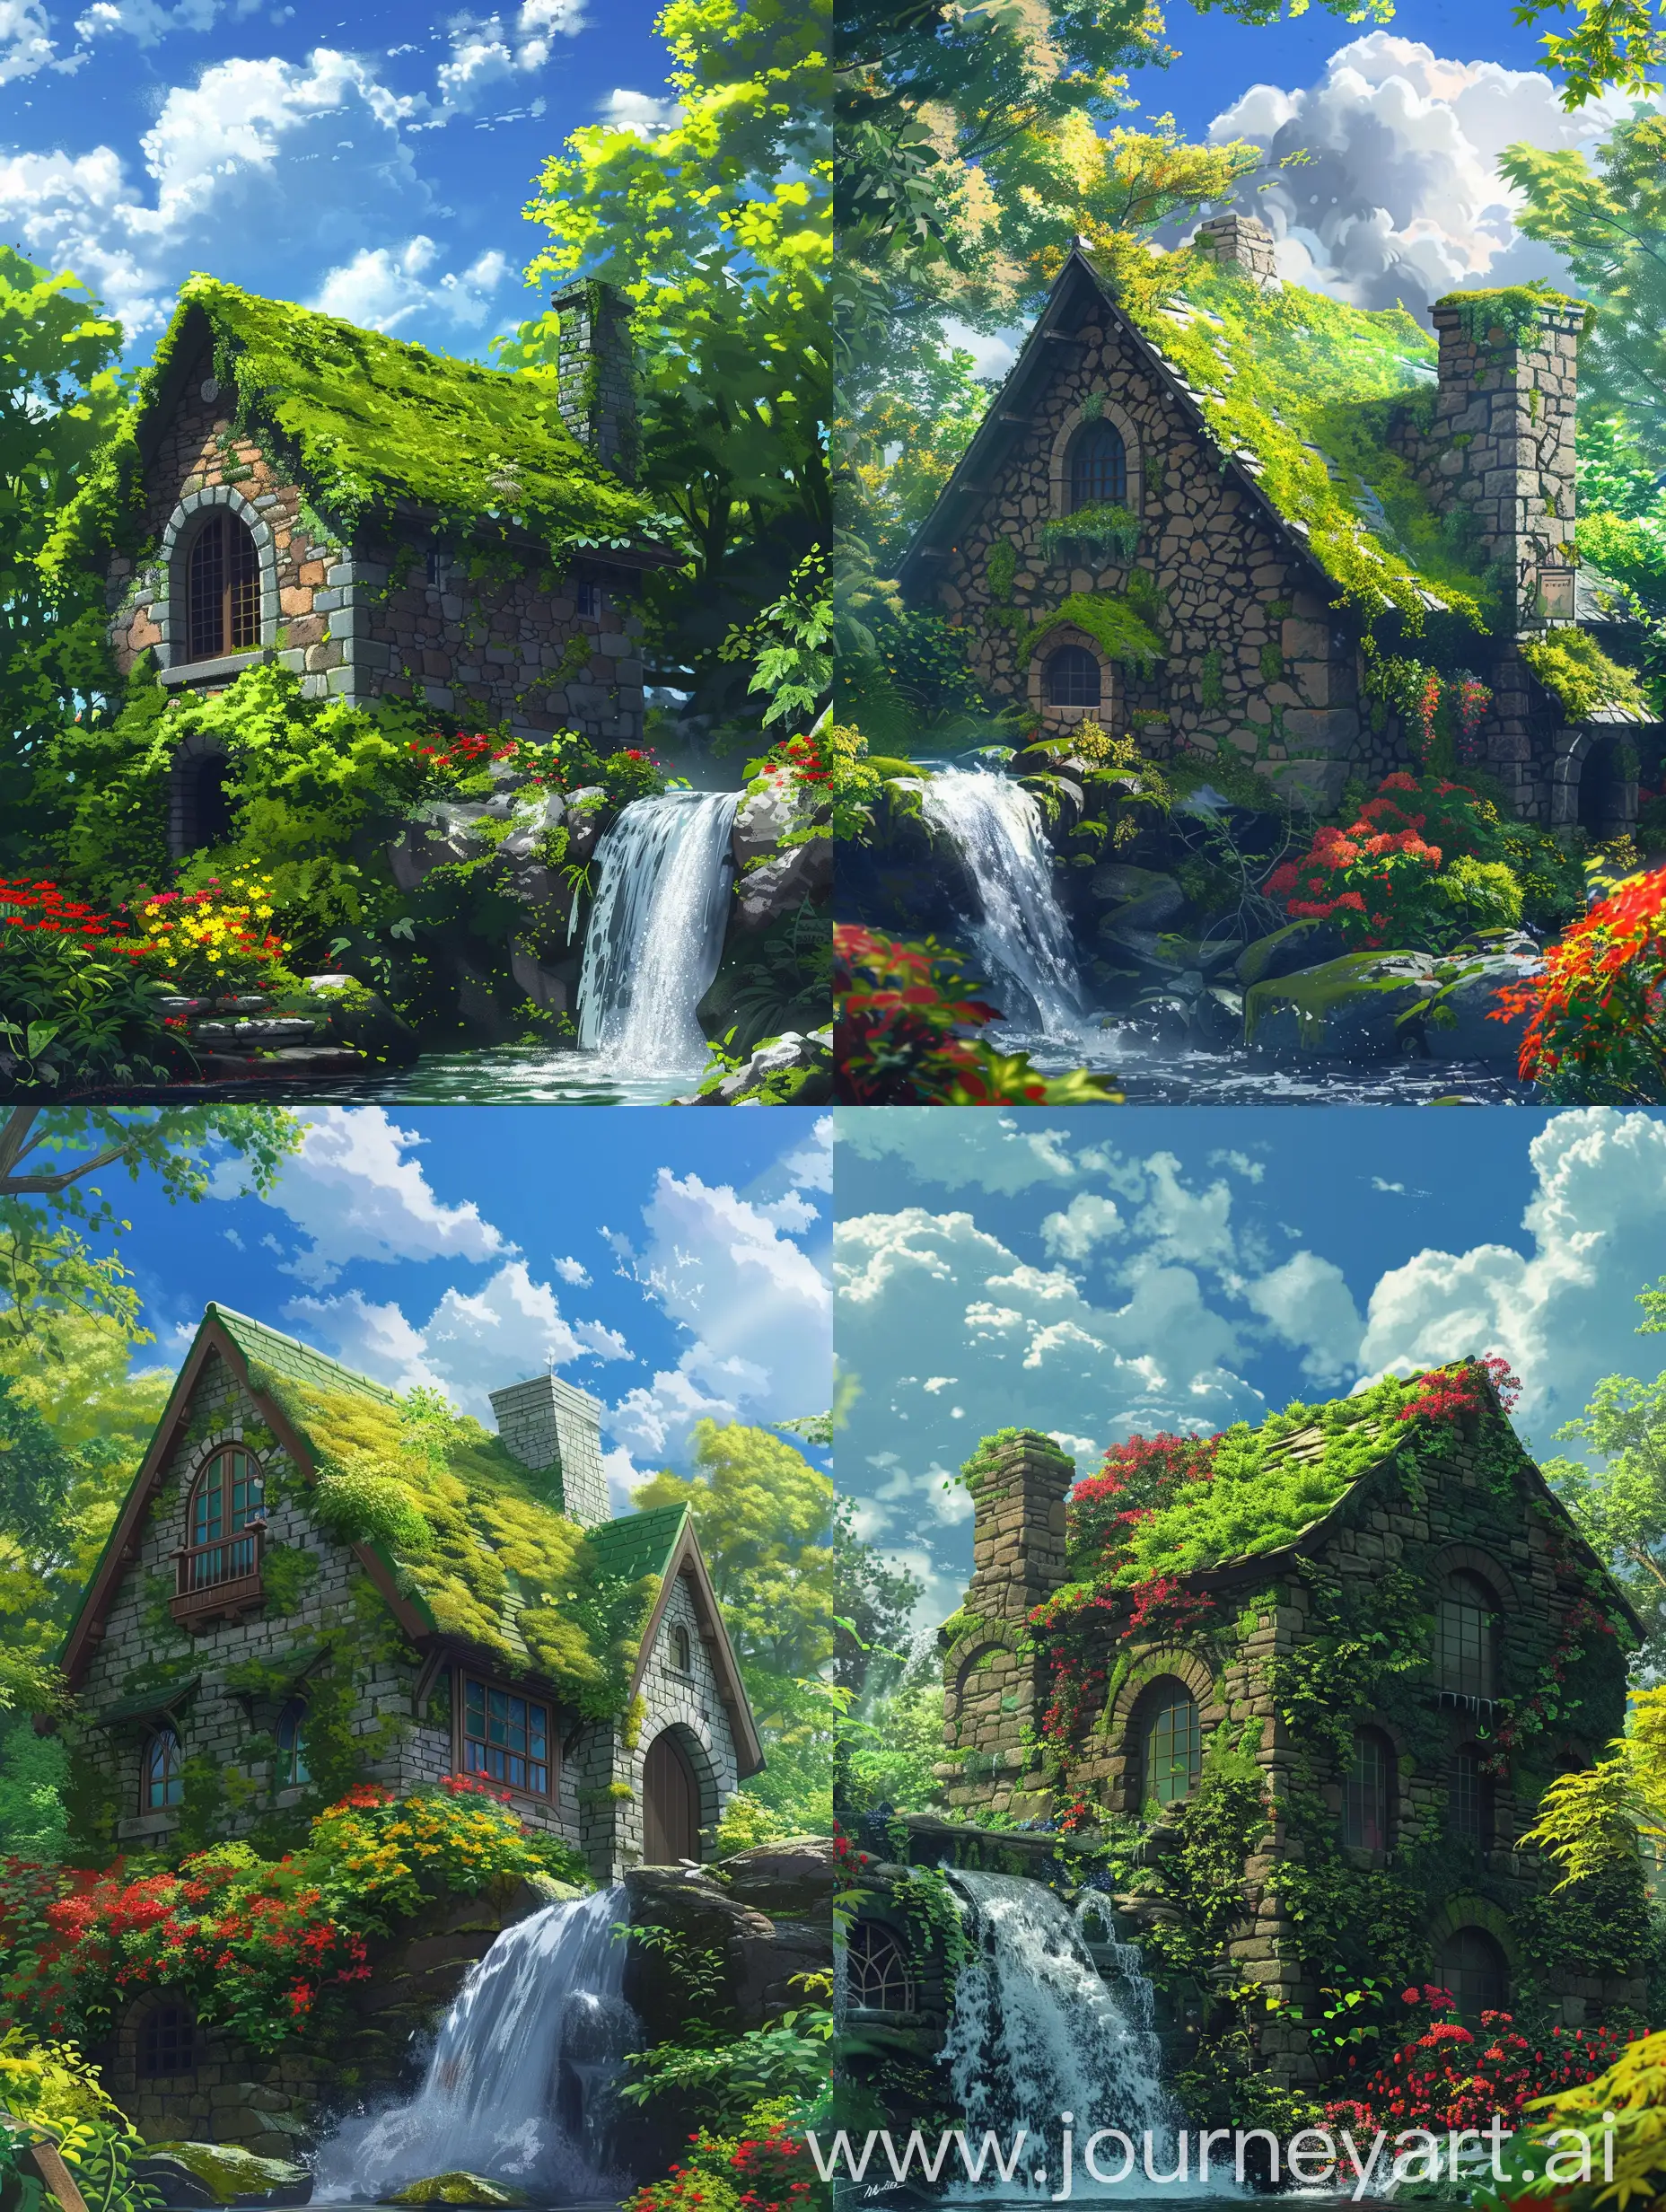 Beautiful anime style scenery,Makato Shinkai style,a little bit of Ghibli studio style touch, a quaint stone cottage with a roof blanketed in moss, suggesting it has been a part of this landscape for many years. An elegant arched window adds to the cottage’s enchanting appearance. The surrounding foliage is in the full embrace of summers, A small waterfall cascades beside the cottage, its gentle flow contributing to the tranquility of the setting. Bright red and yellow flowers near the waterfall’s base inject pops of color into the predominantly green scene. This peaceful tableau, devoid of any human presence, invites onlookers to imagine a quiet life amidst nature’s beauty beautiful summers,beautiful sky,fluffy clouds.